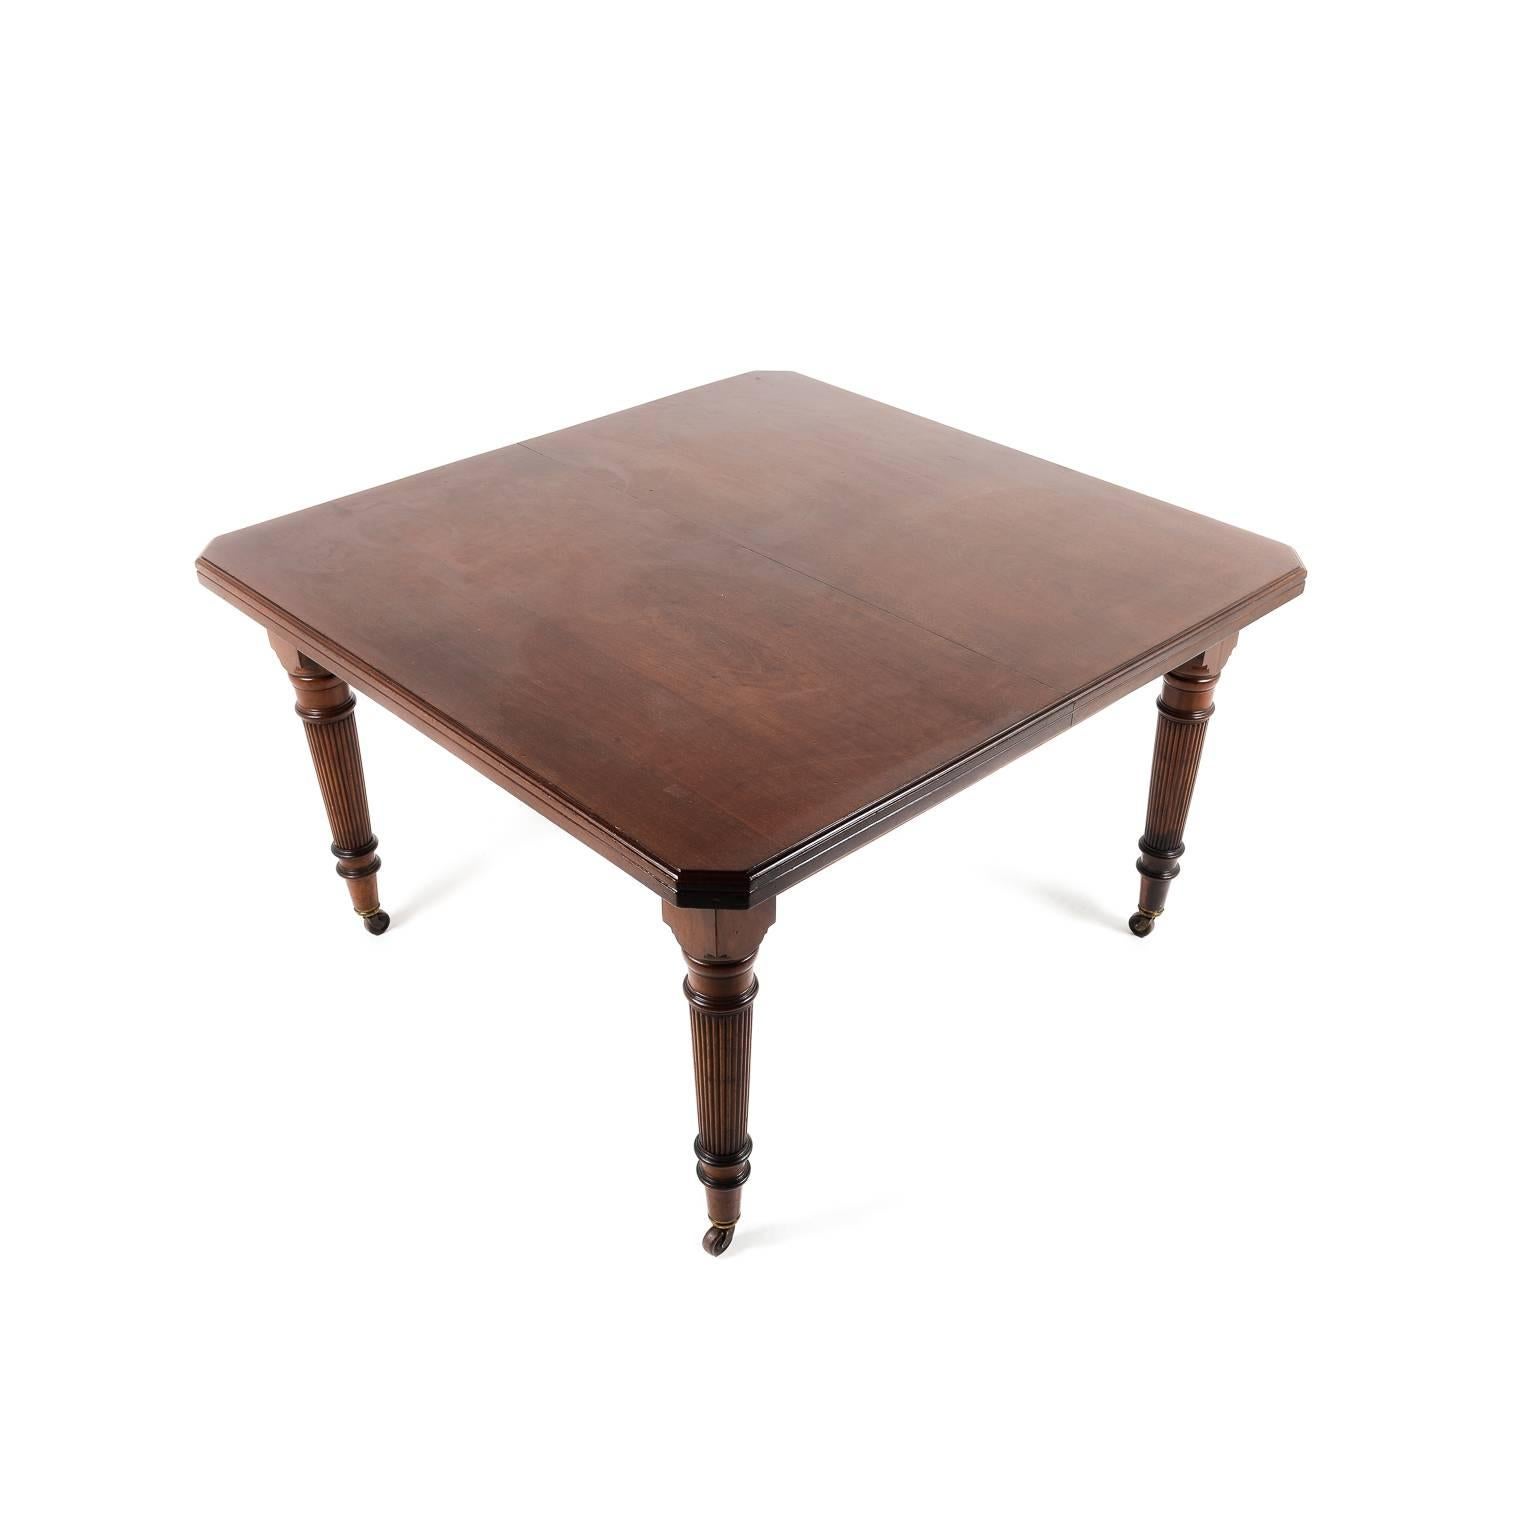 20th Century Antique Solid Mahogany English Table Signed ‘Maple & Co’, circa 1900